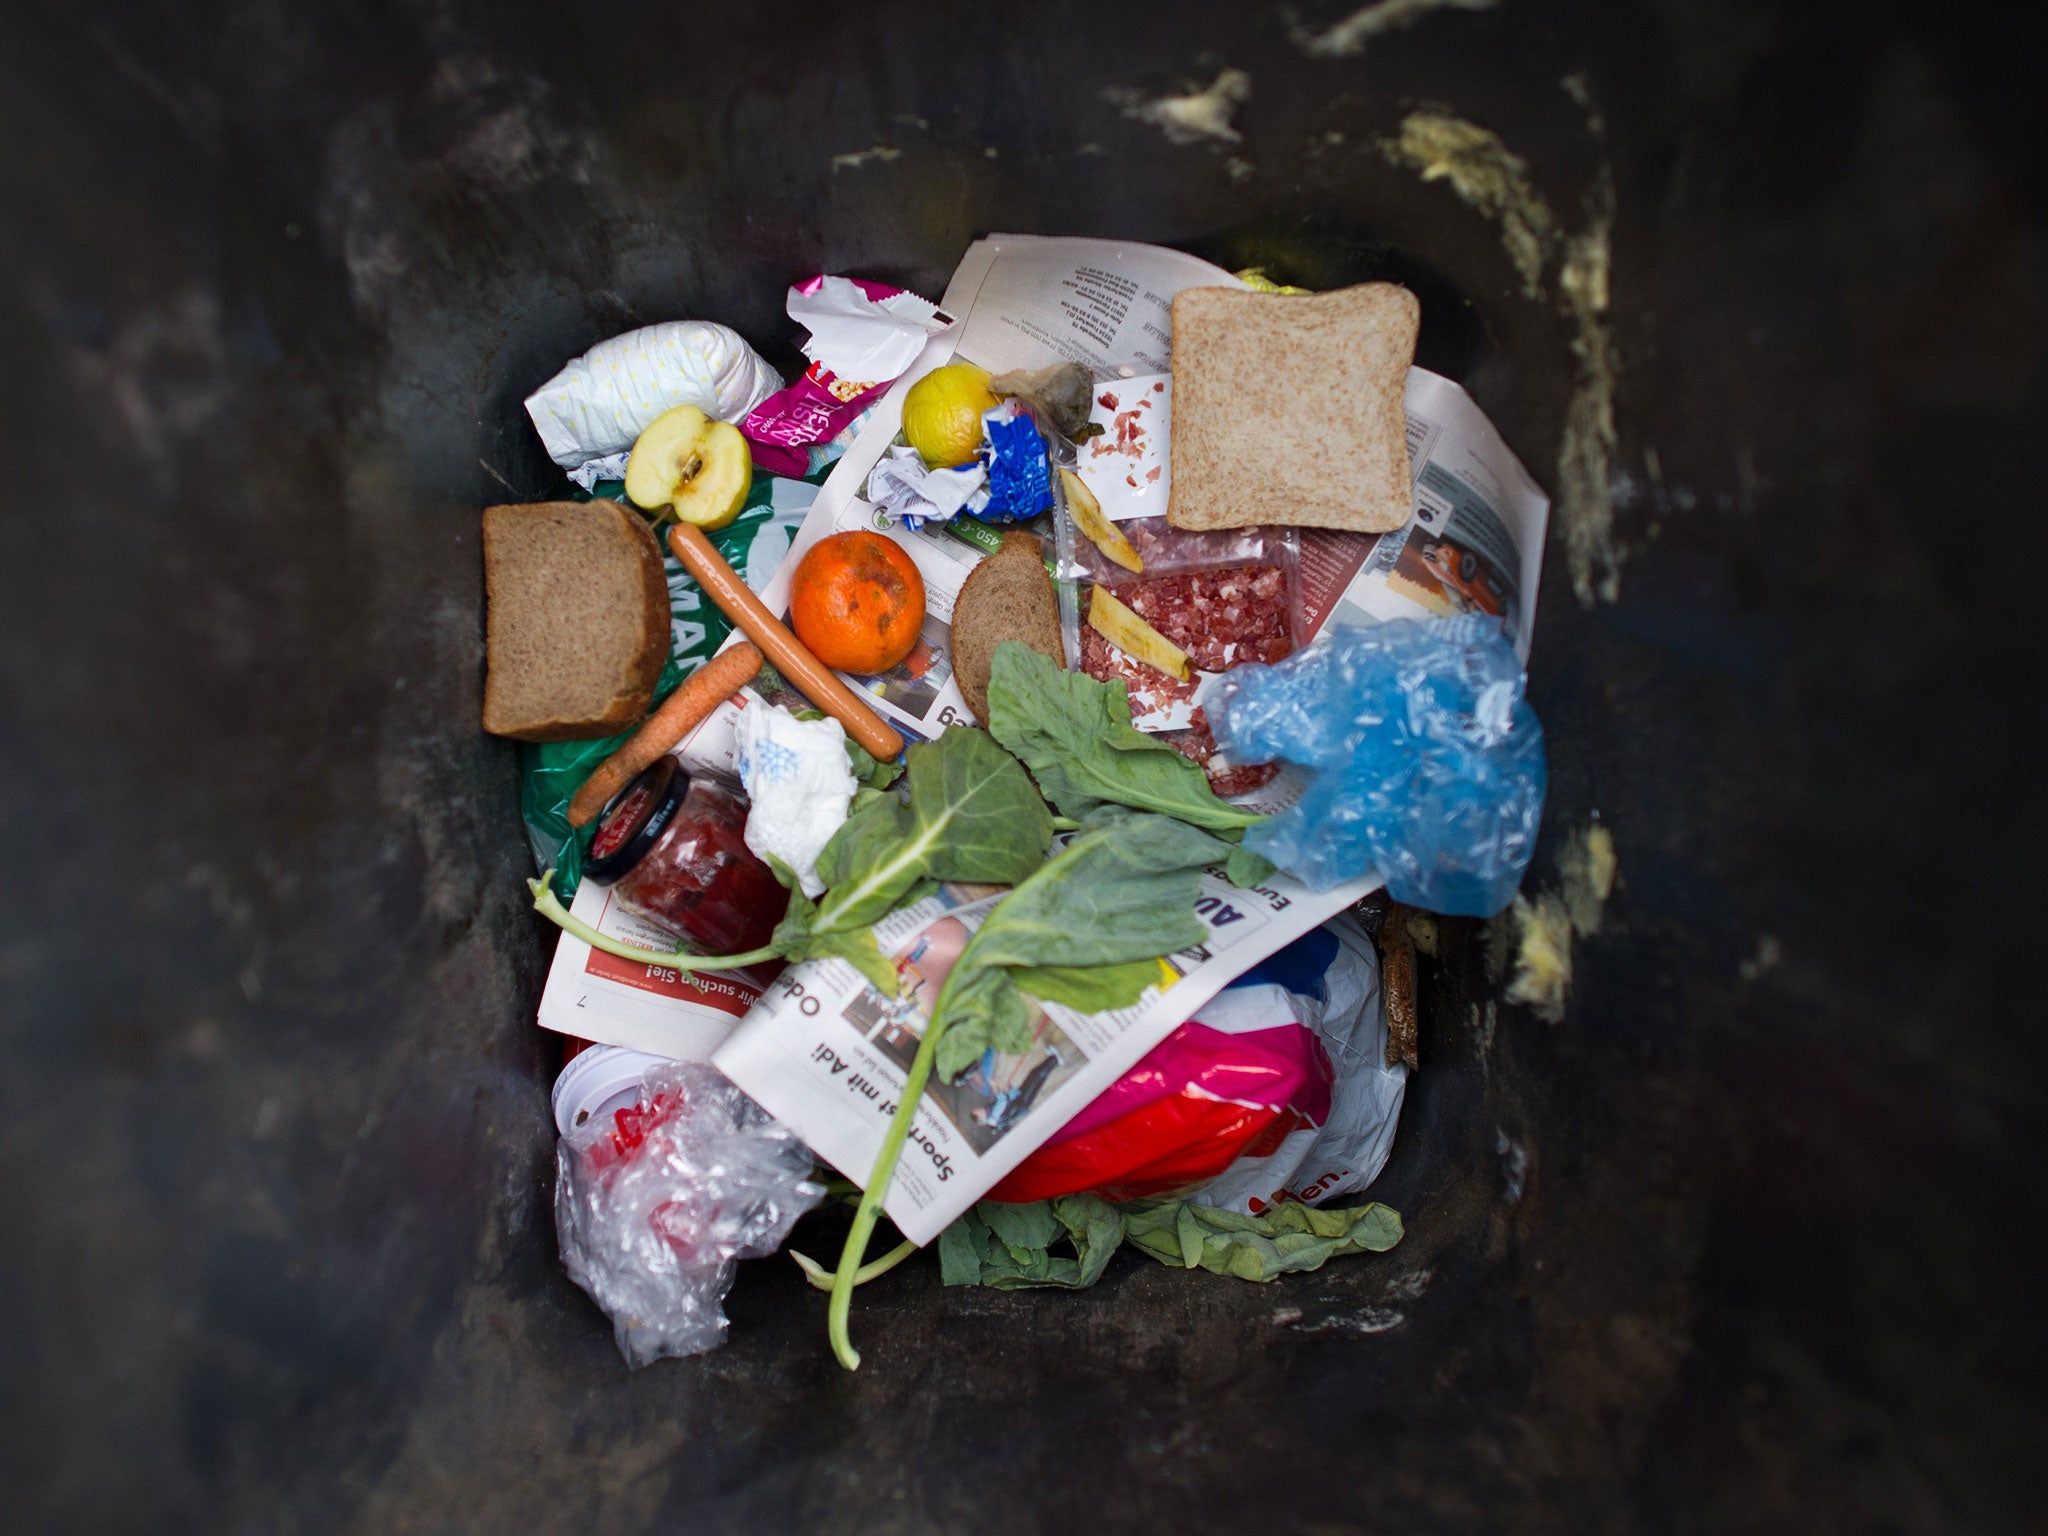 Millions of tonnes of food is wasted in the UK alone each year